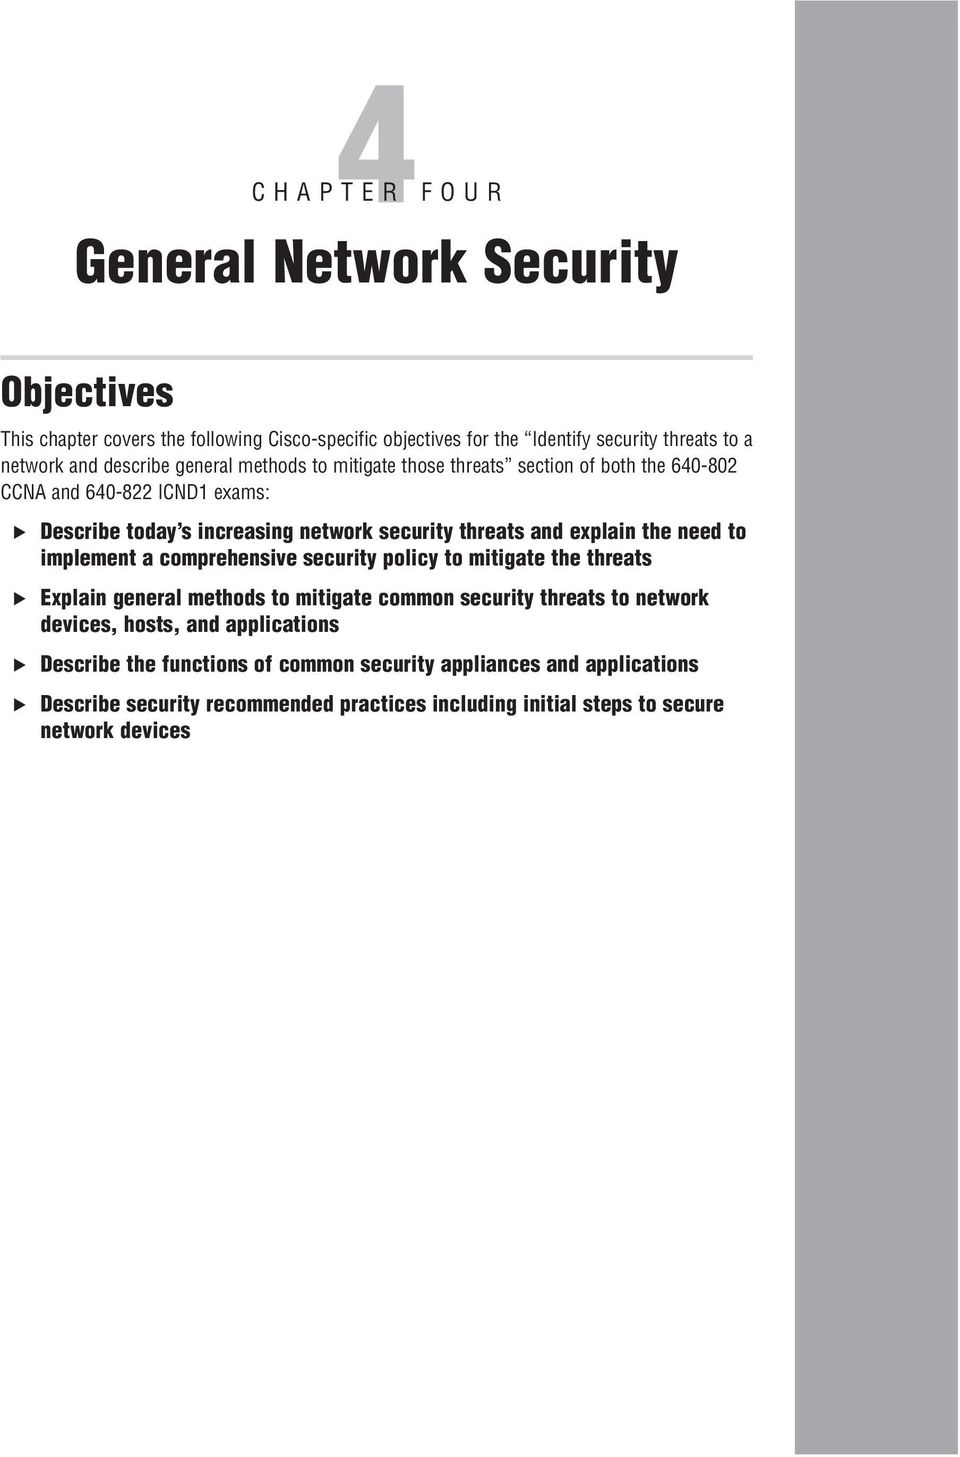 Describe today s increasing network security threats and explain the need to implement a comprehensive security policy to mitigate the threats.